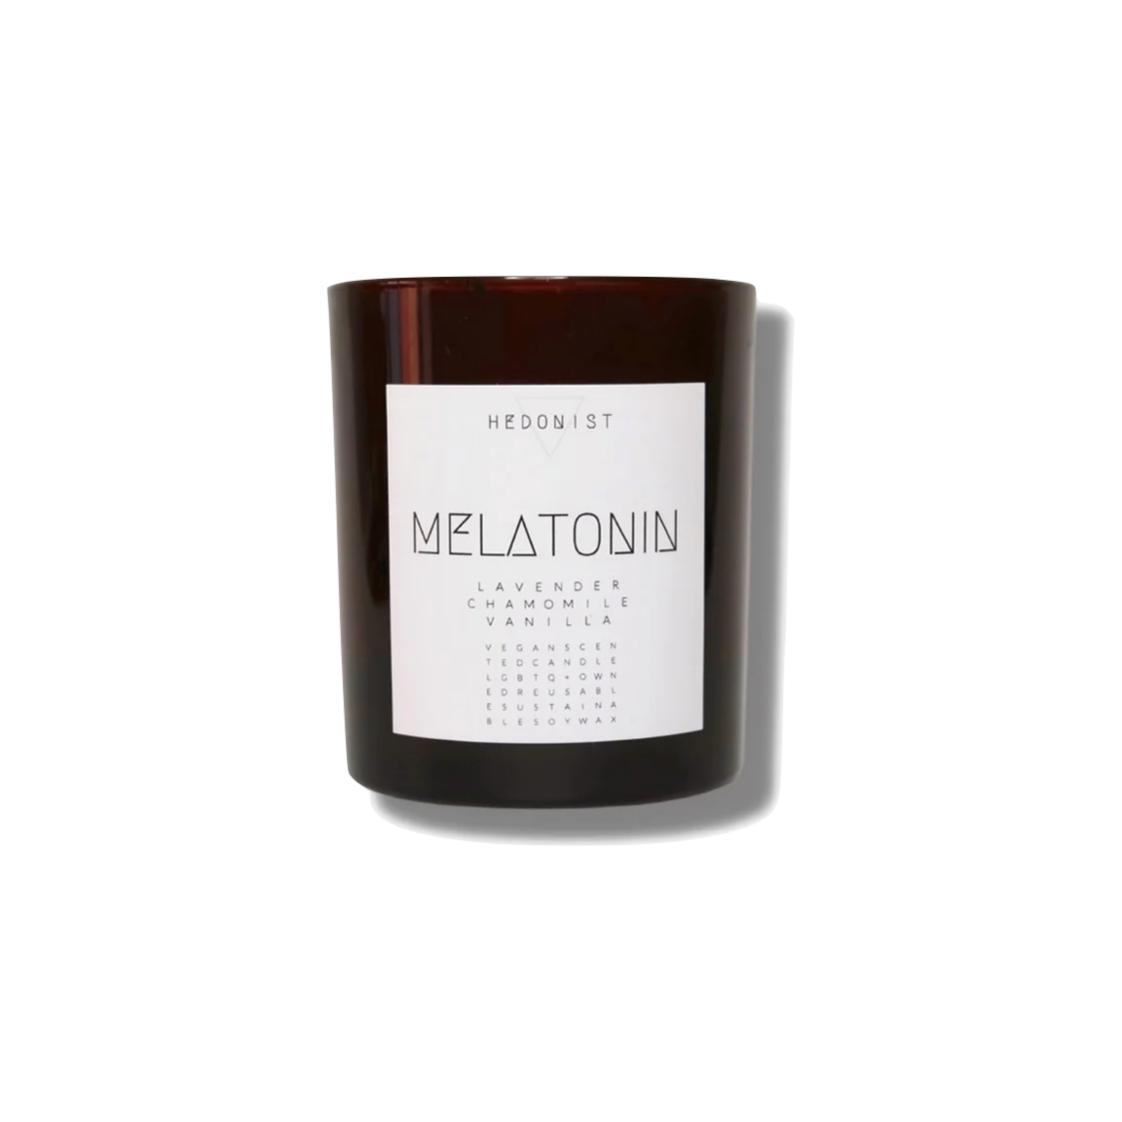 Candle housed in a brown glass jar, with a white label featuring simple text with the name Melatonin in caps